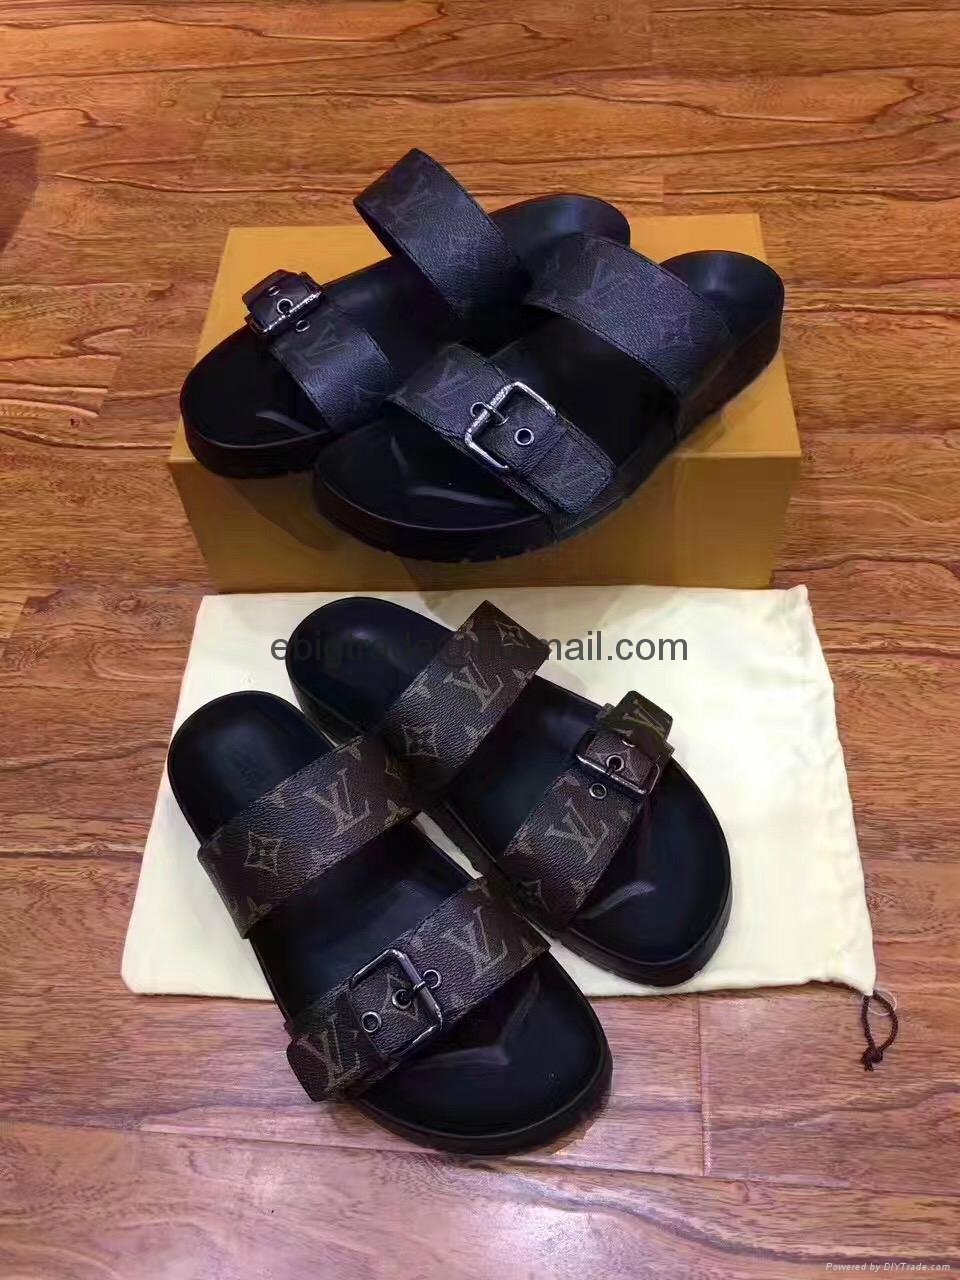 Louis Vuitton lv man slippers slides  Lv slippers, Bling shoes, Sandals  store